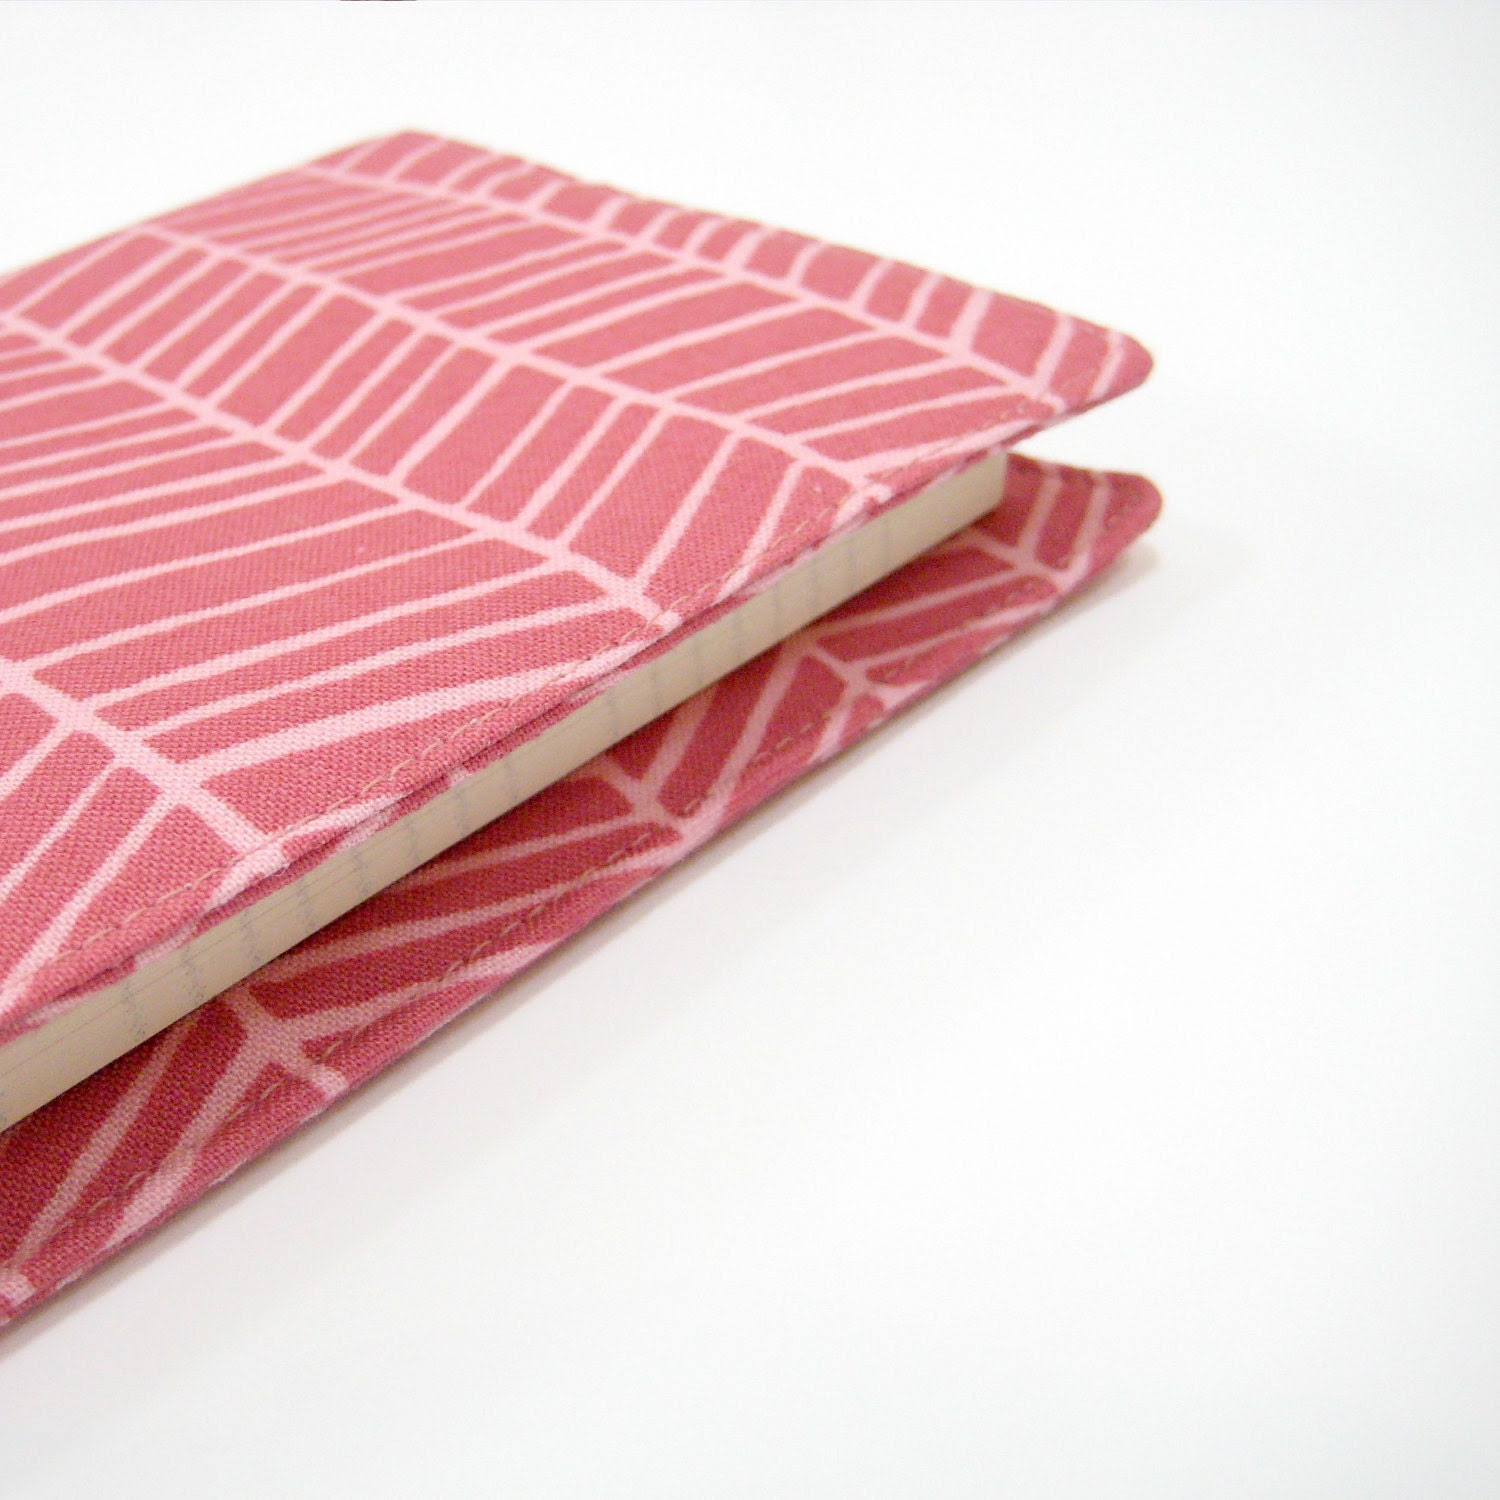 Pink geometric pocket Moleskine cover, refillable notebook cover, handmade by greengrass2 - greengrass2